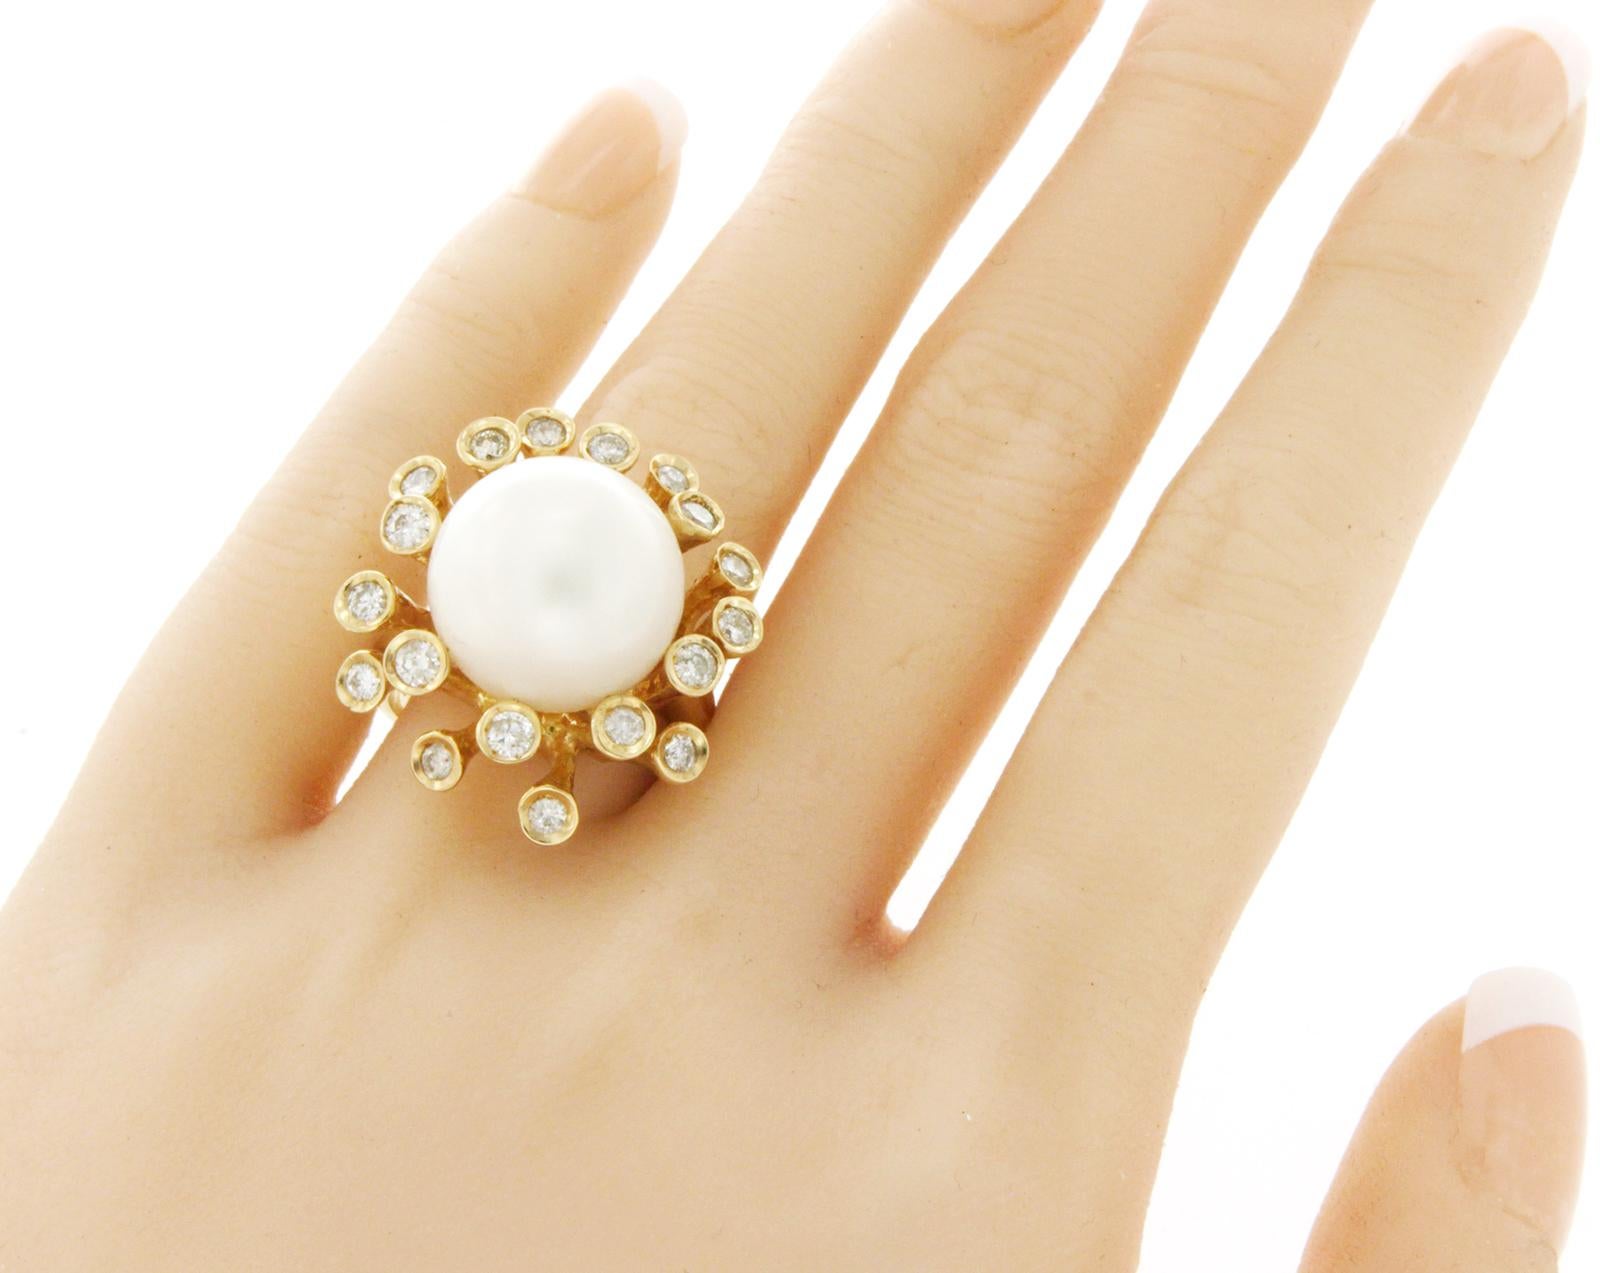 Top: 25 mm
Band Width: 3.5 mm
Metal: 14K Yellow Gold 
Size: Message us for size
Hallmarks: 14K
Total Weight: 15.6 Grams
Stone Type: 15 mm South Sea Pearl & 1.10 CT G SI2 Diamonds
Condition: New
Estimated Retail Price: $4200
Stock Number: RF